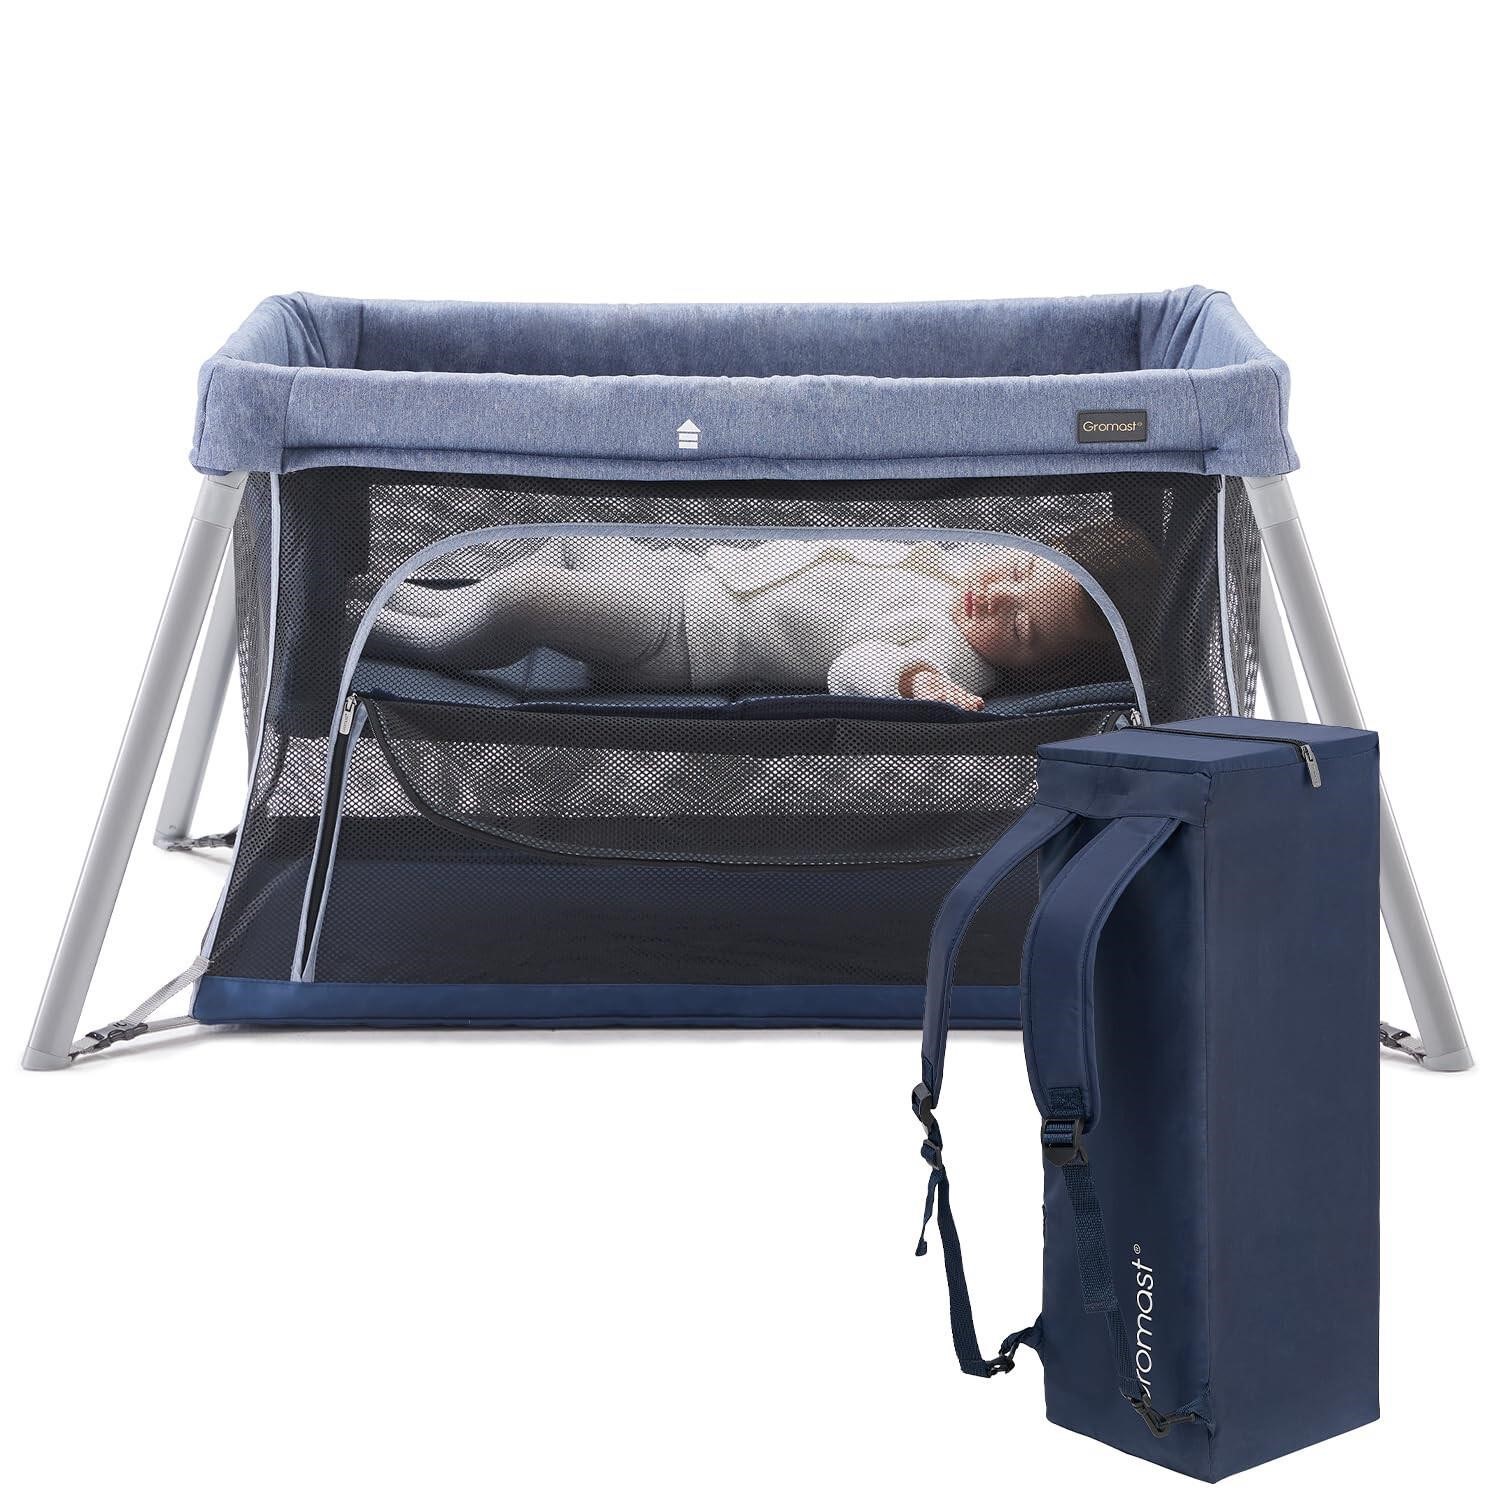 Gromast Travel Crib for Toddler, 2 in 1 Portable C